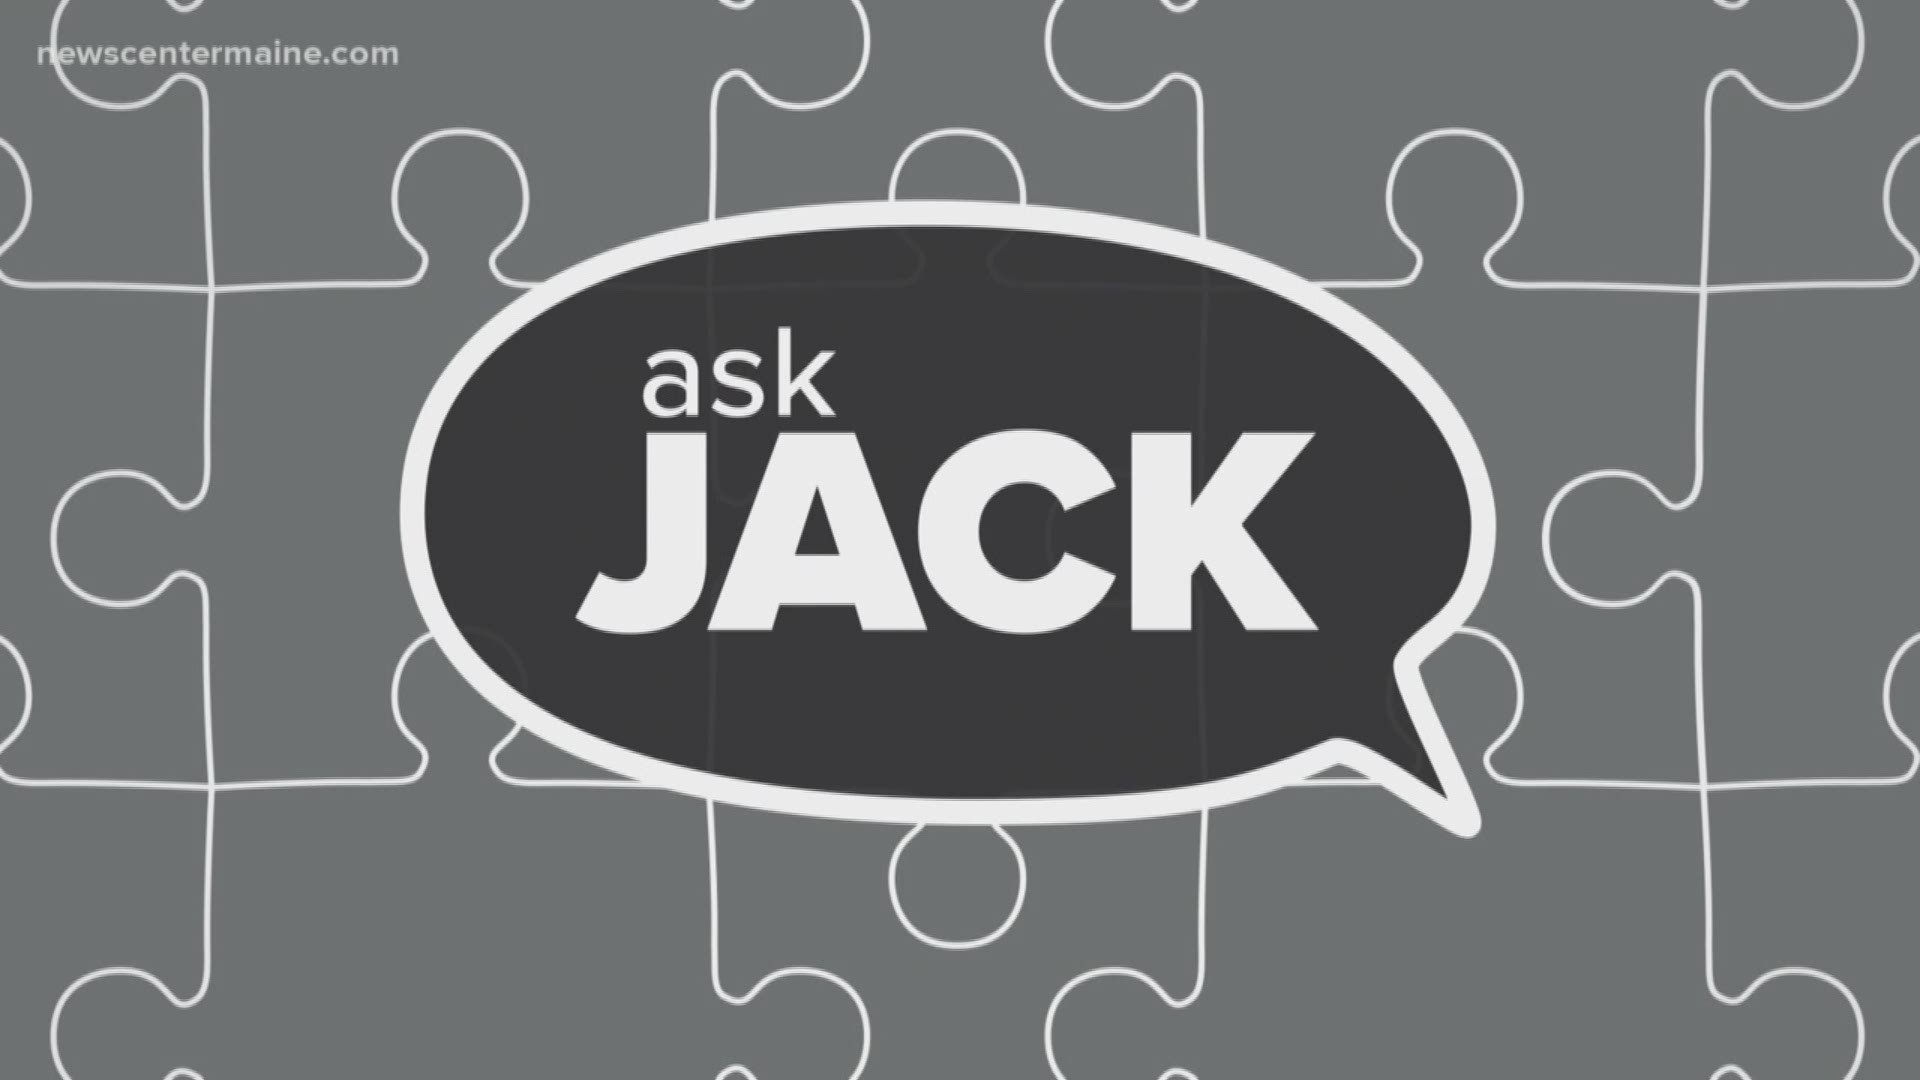 This week Jack Burke LMFT answers number 7 of the top 10 questions asked of therapists.